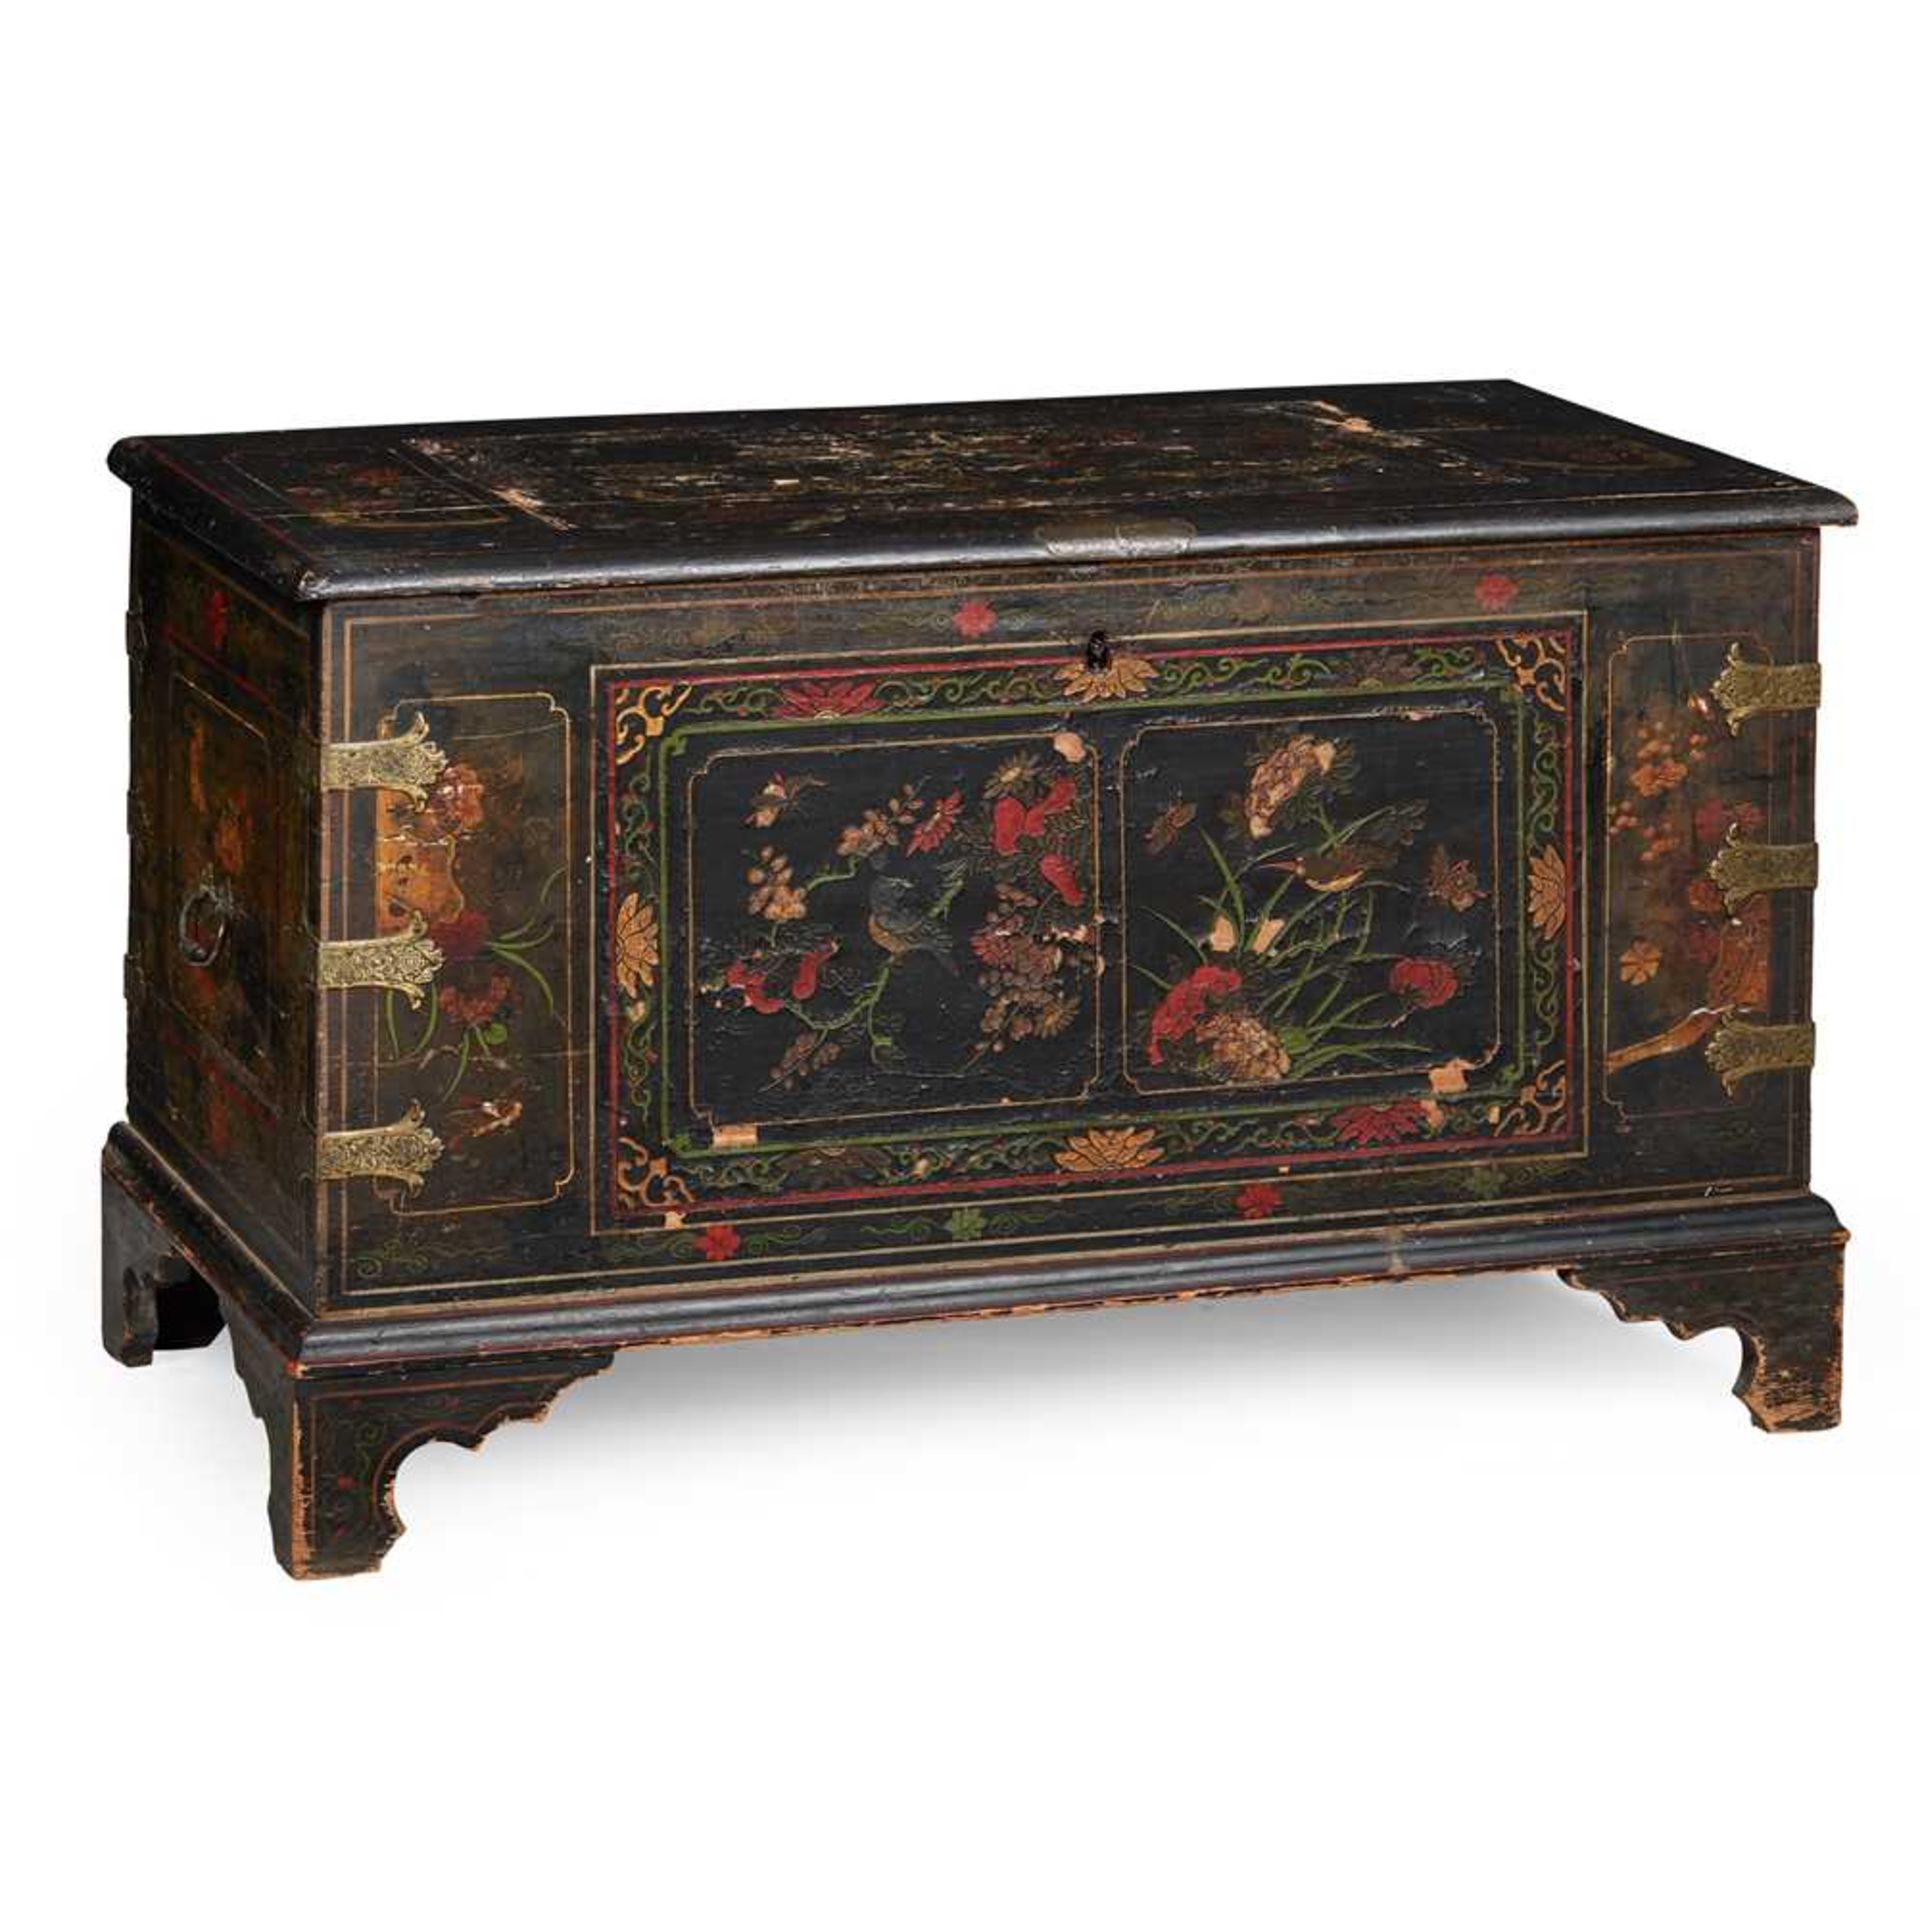 CHINESE COROMANDEL LACQUER AND POLYCHROME JAPANNED EBONISED CHEST EARLY 18TH CENTURY